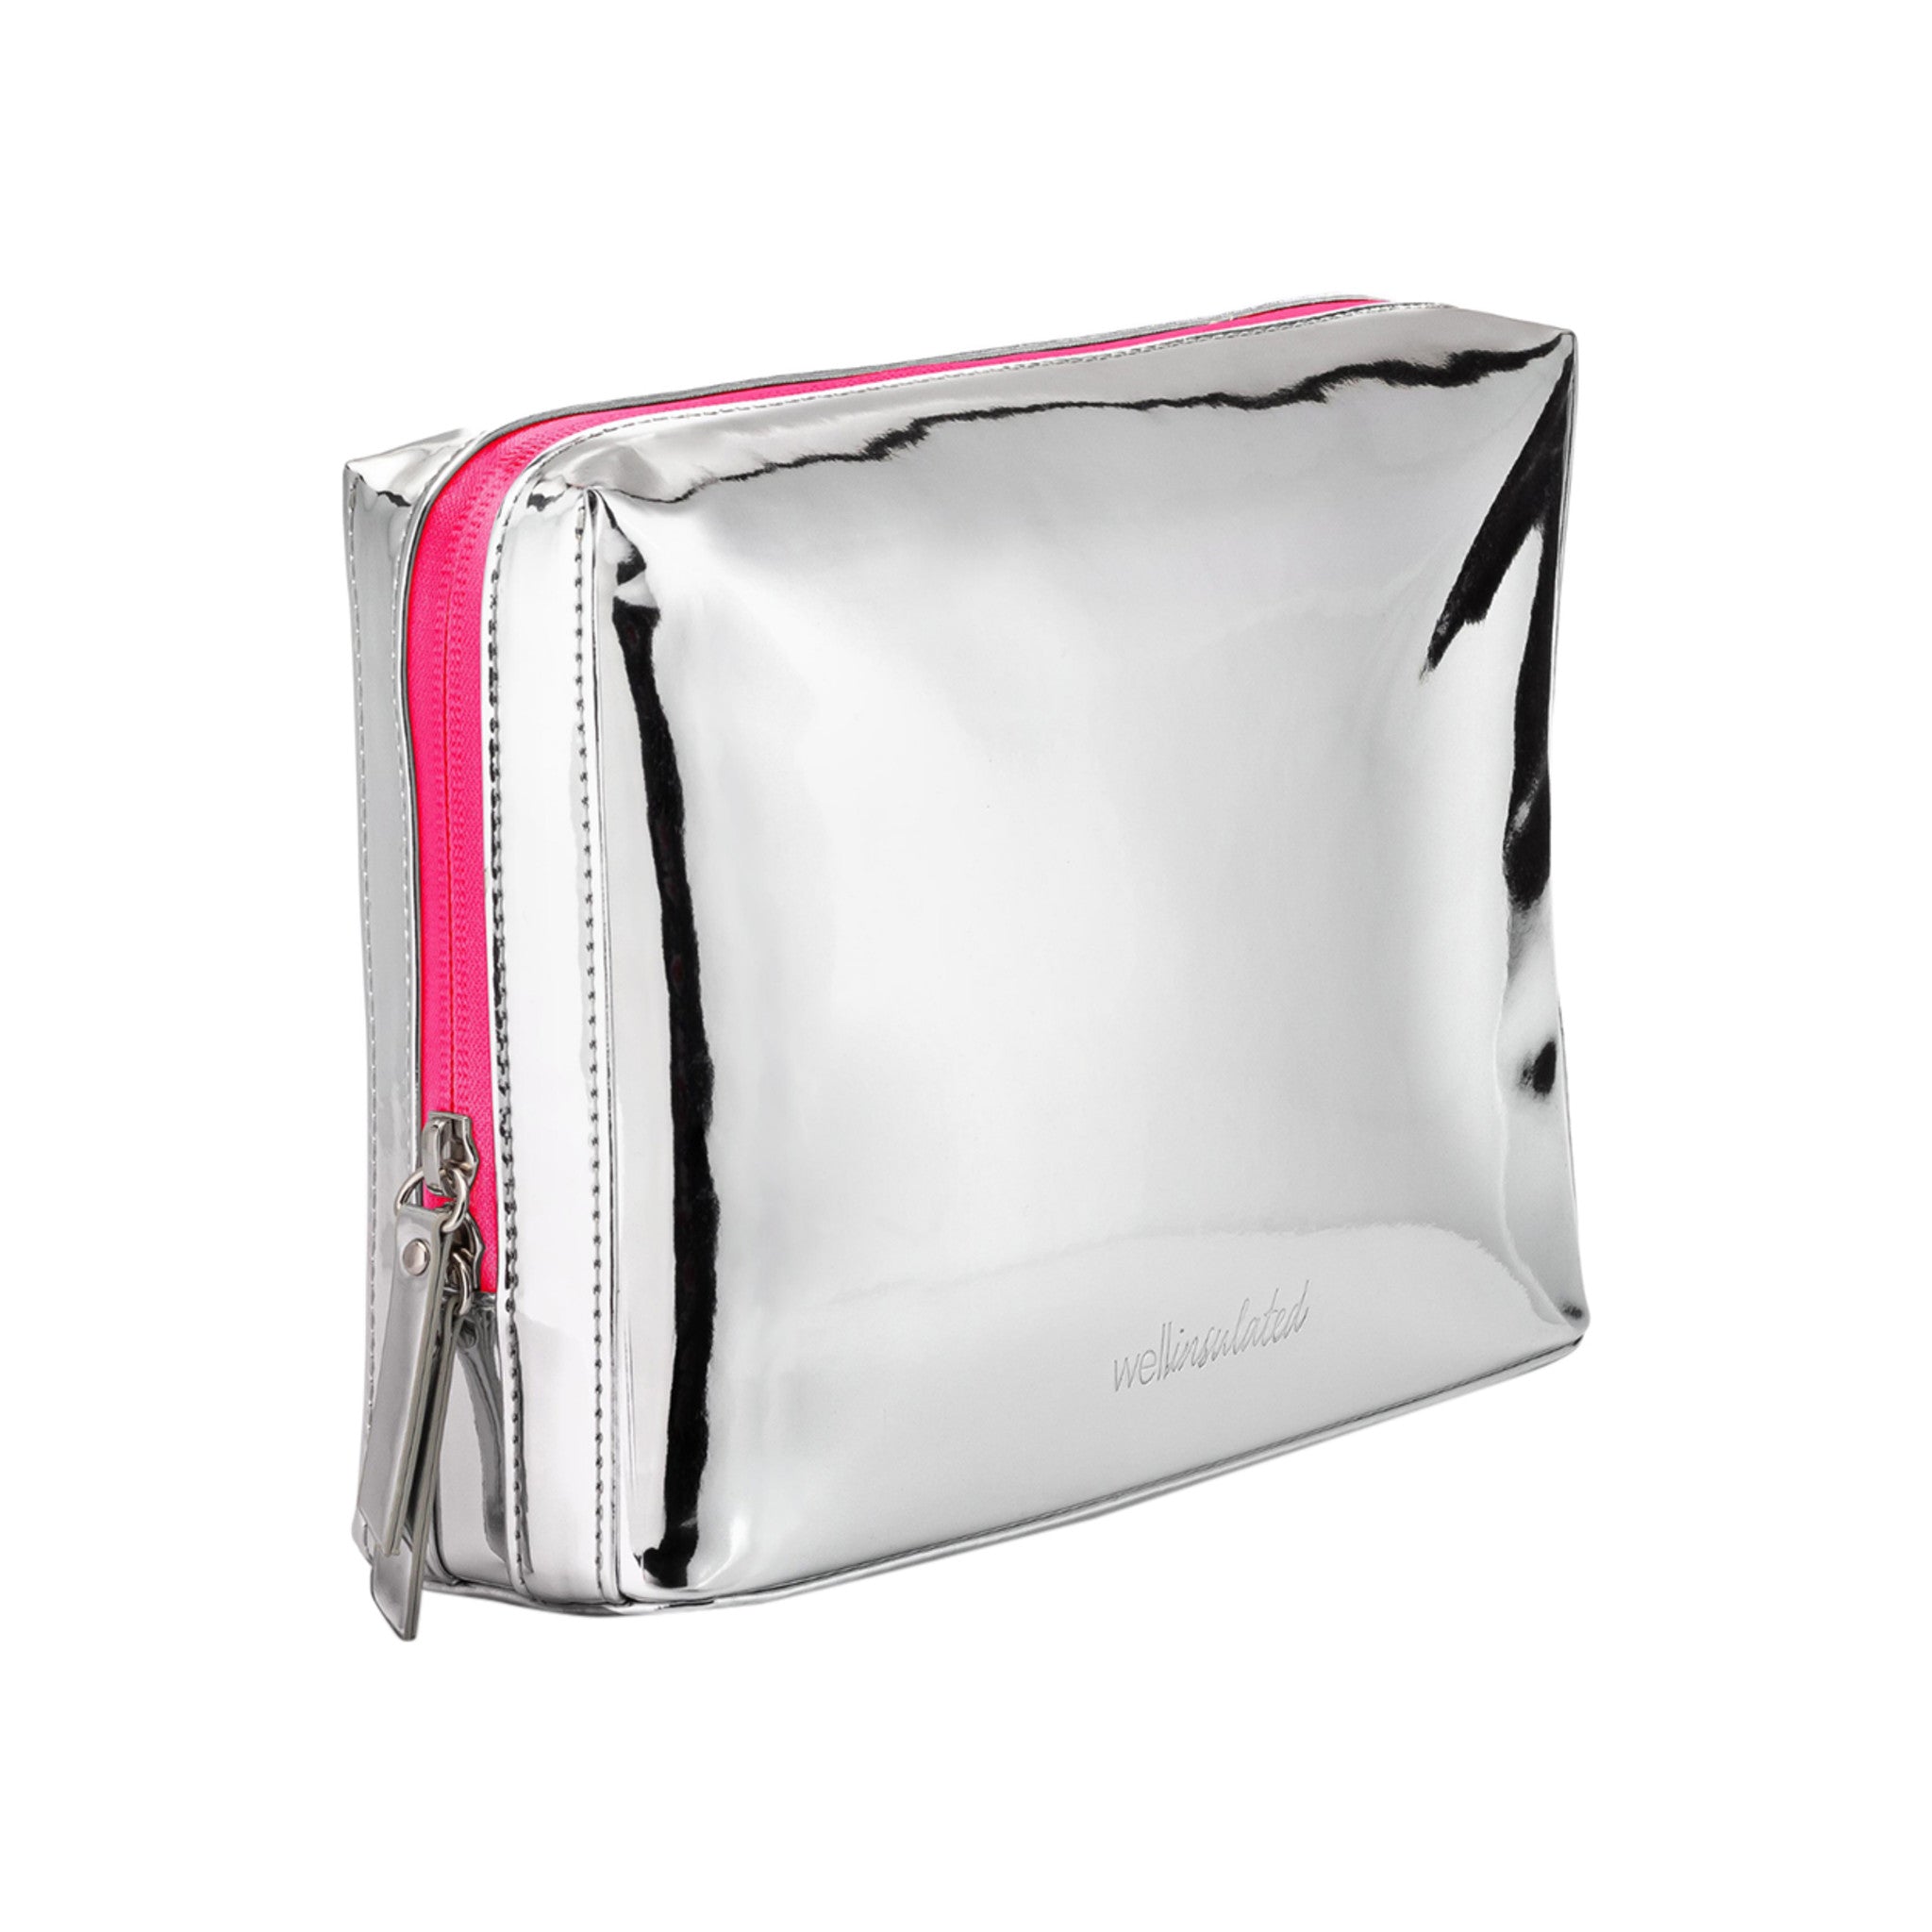 Wellinsulated Performance Beauty Bag Large (Limited Edition) main image.